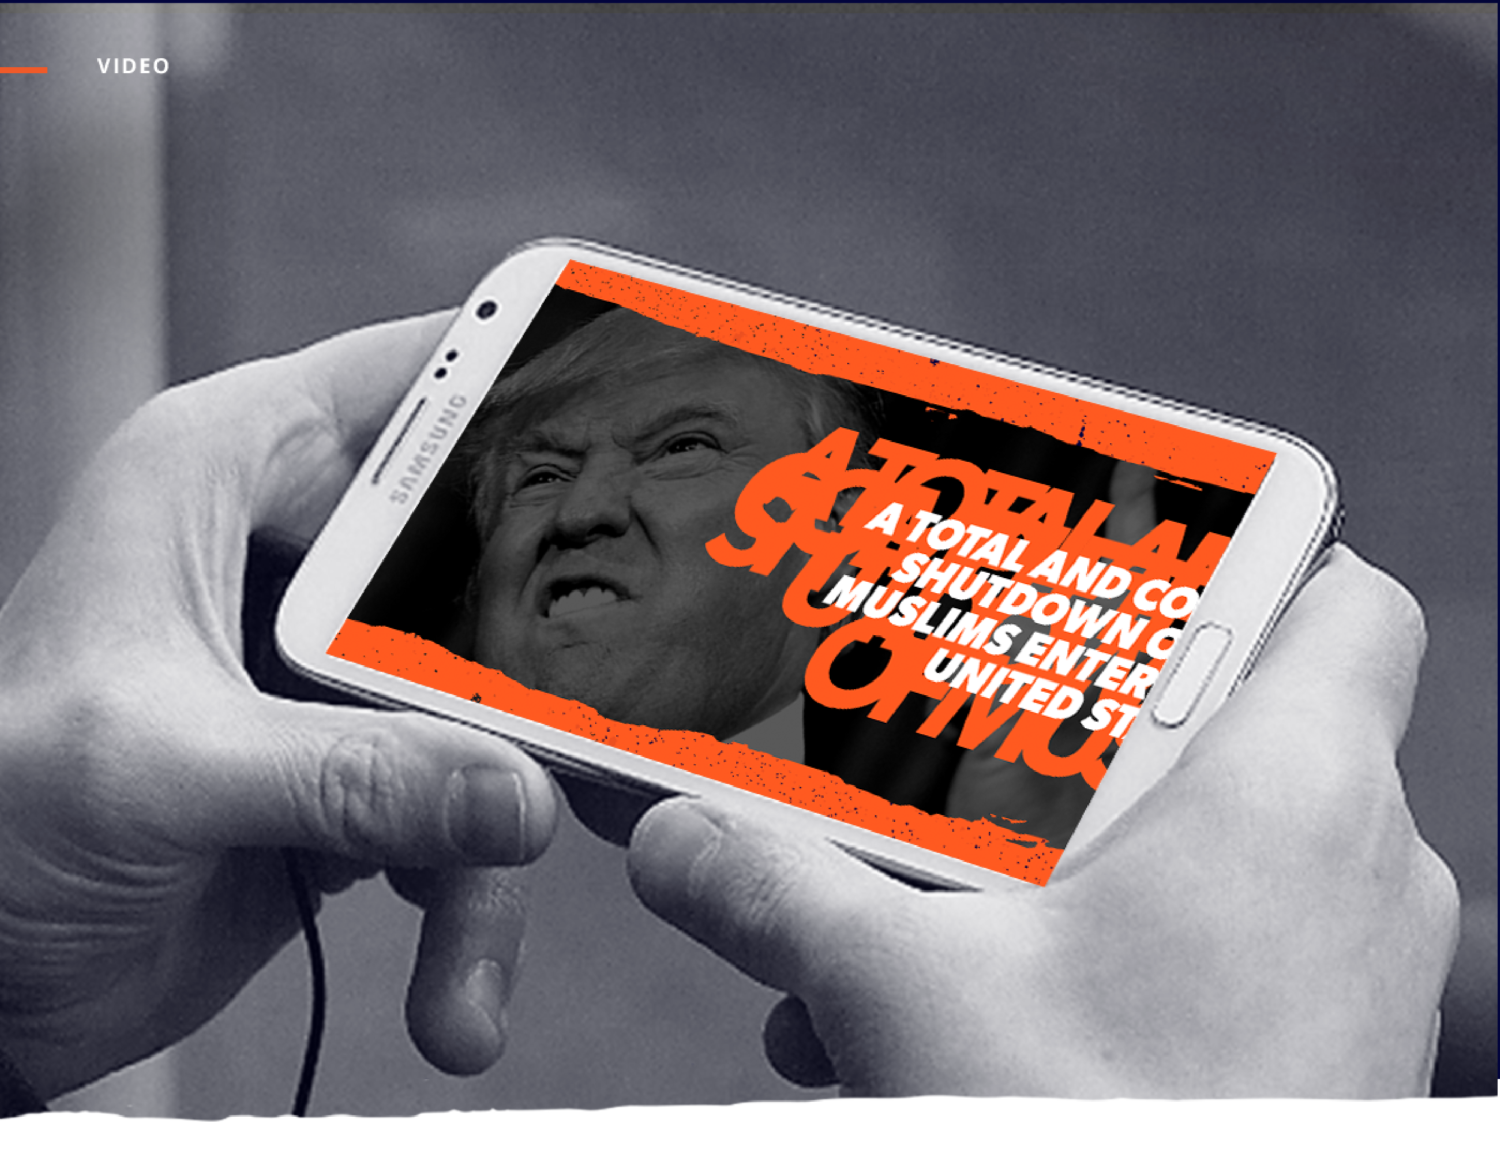 Mockup image of a campaign video on a mobile device